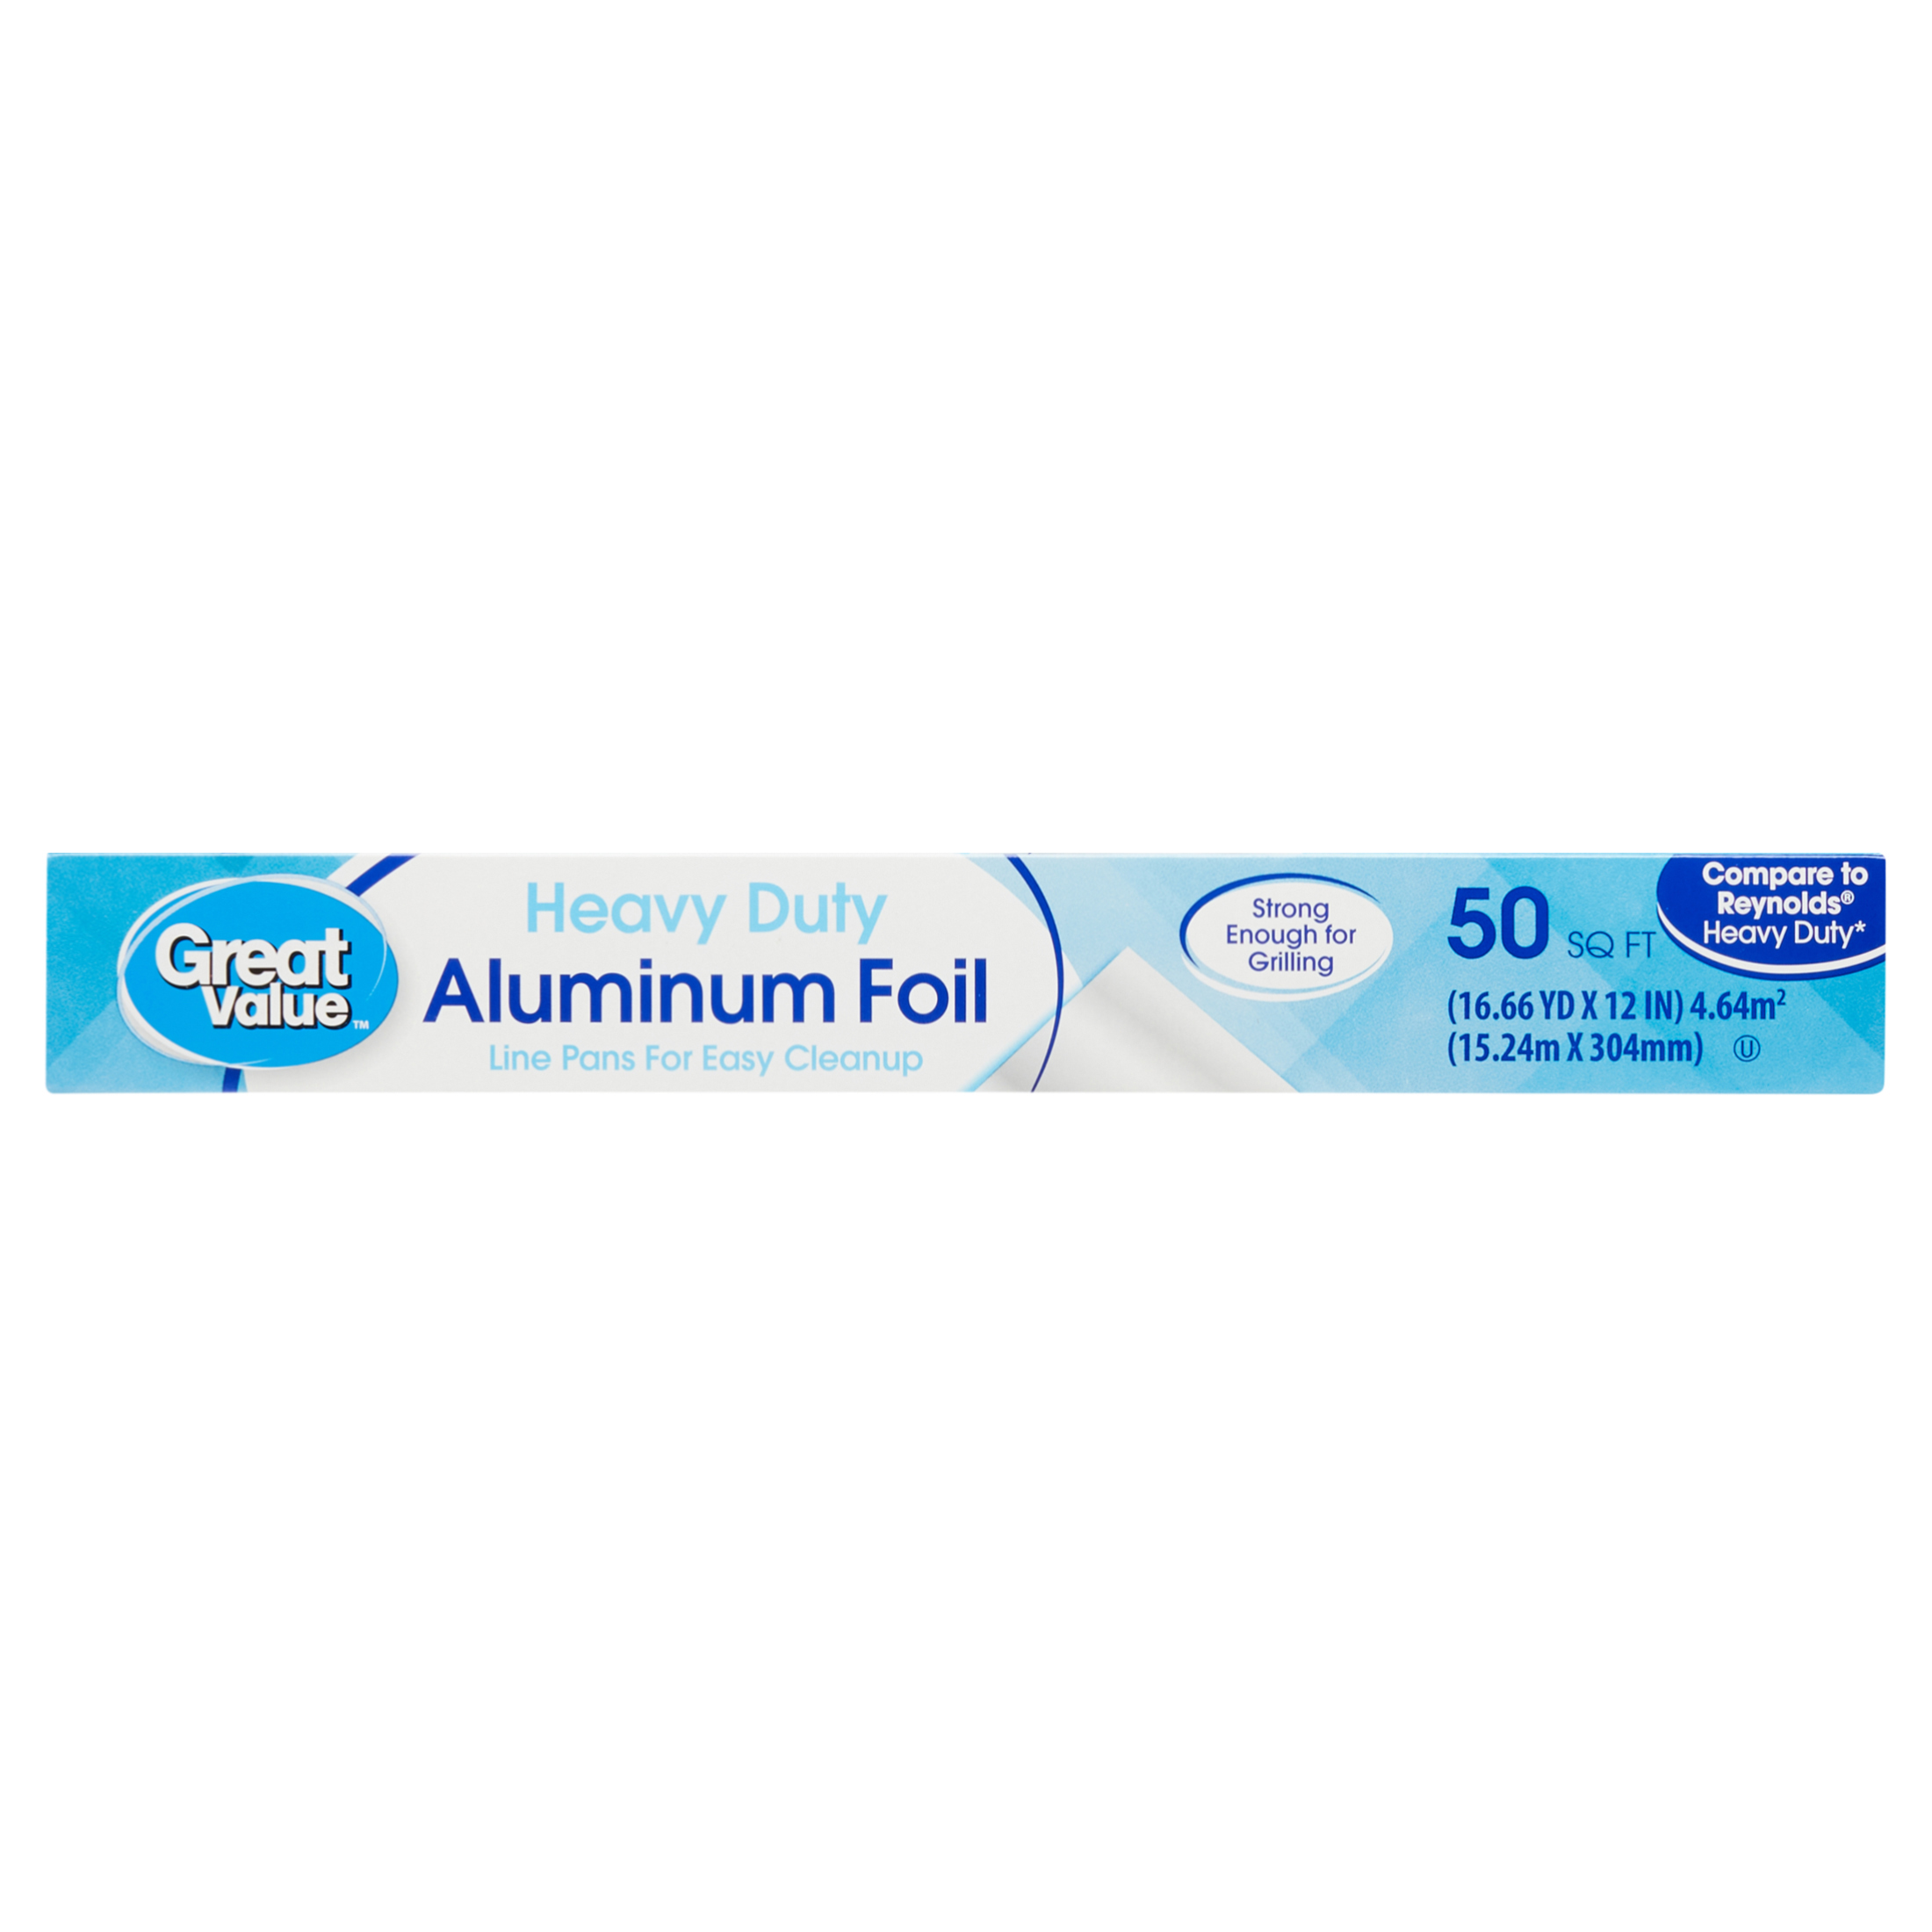 Great Value Heavy Duty Aluminum Foil, 50 sq ft - image 1 of 7